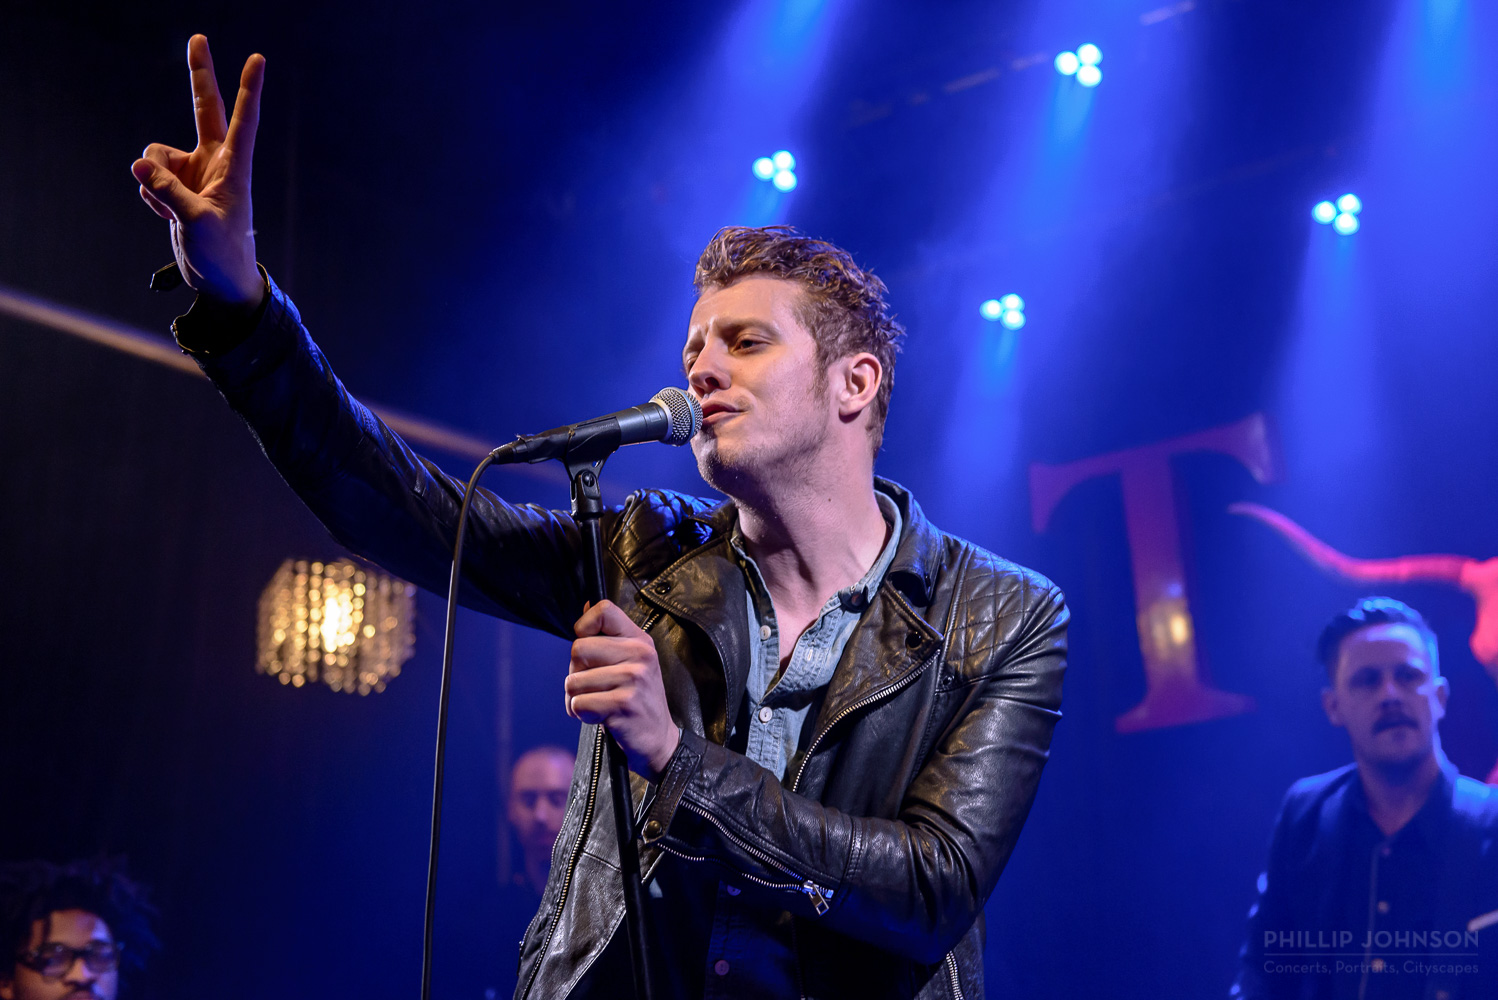 The Nashville Soul of Anderson East